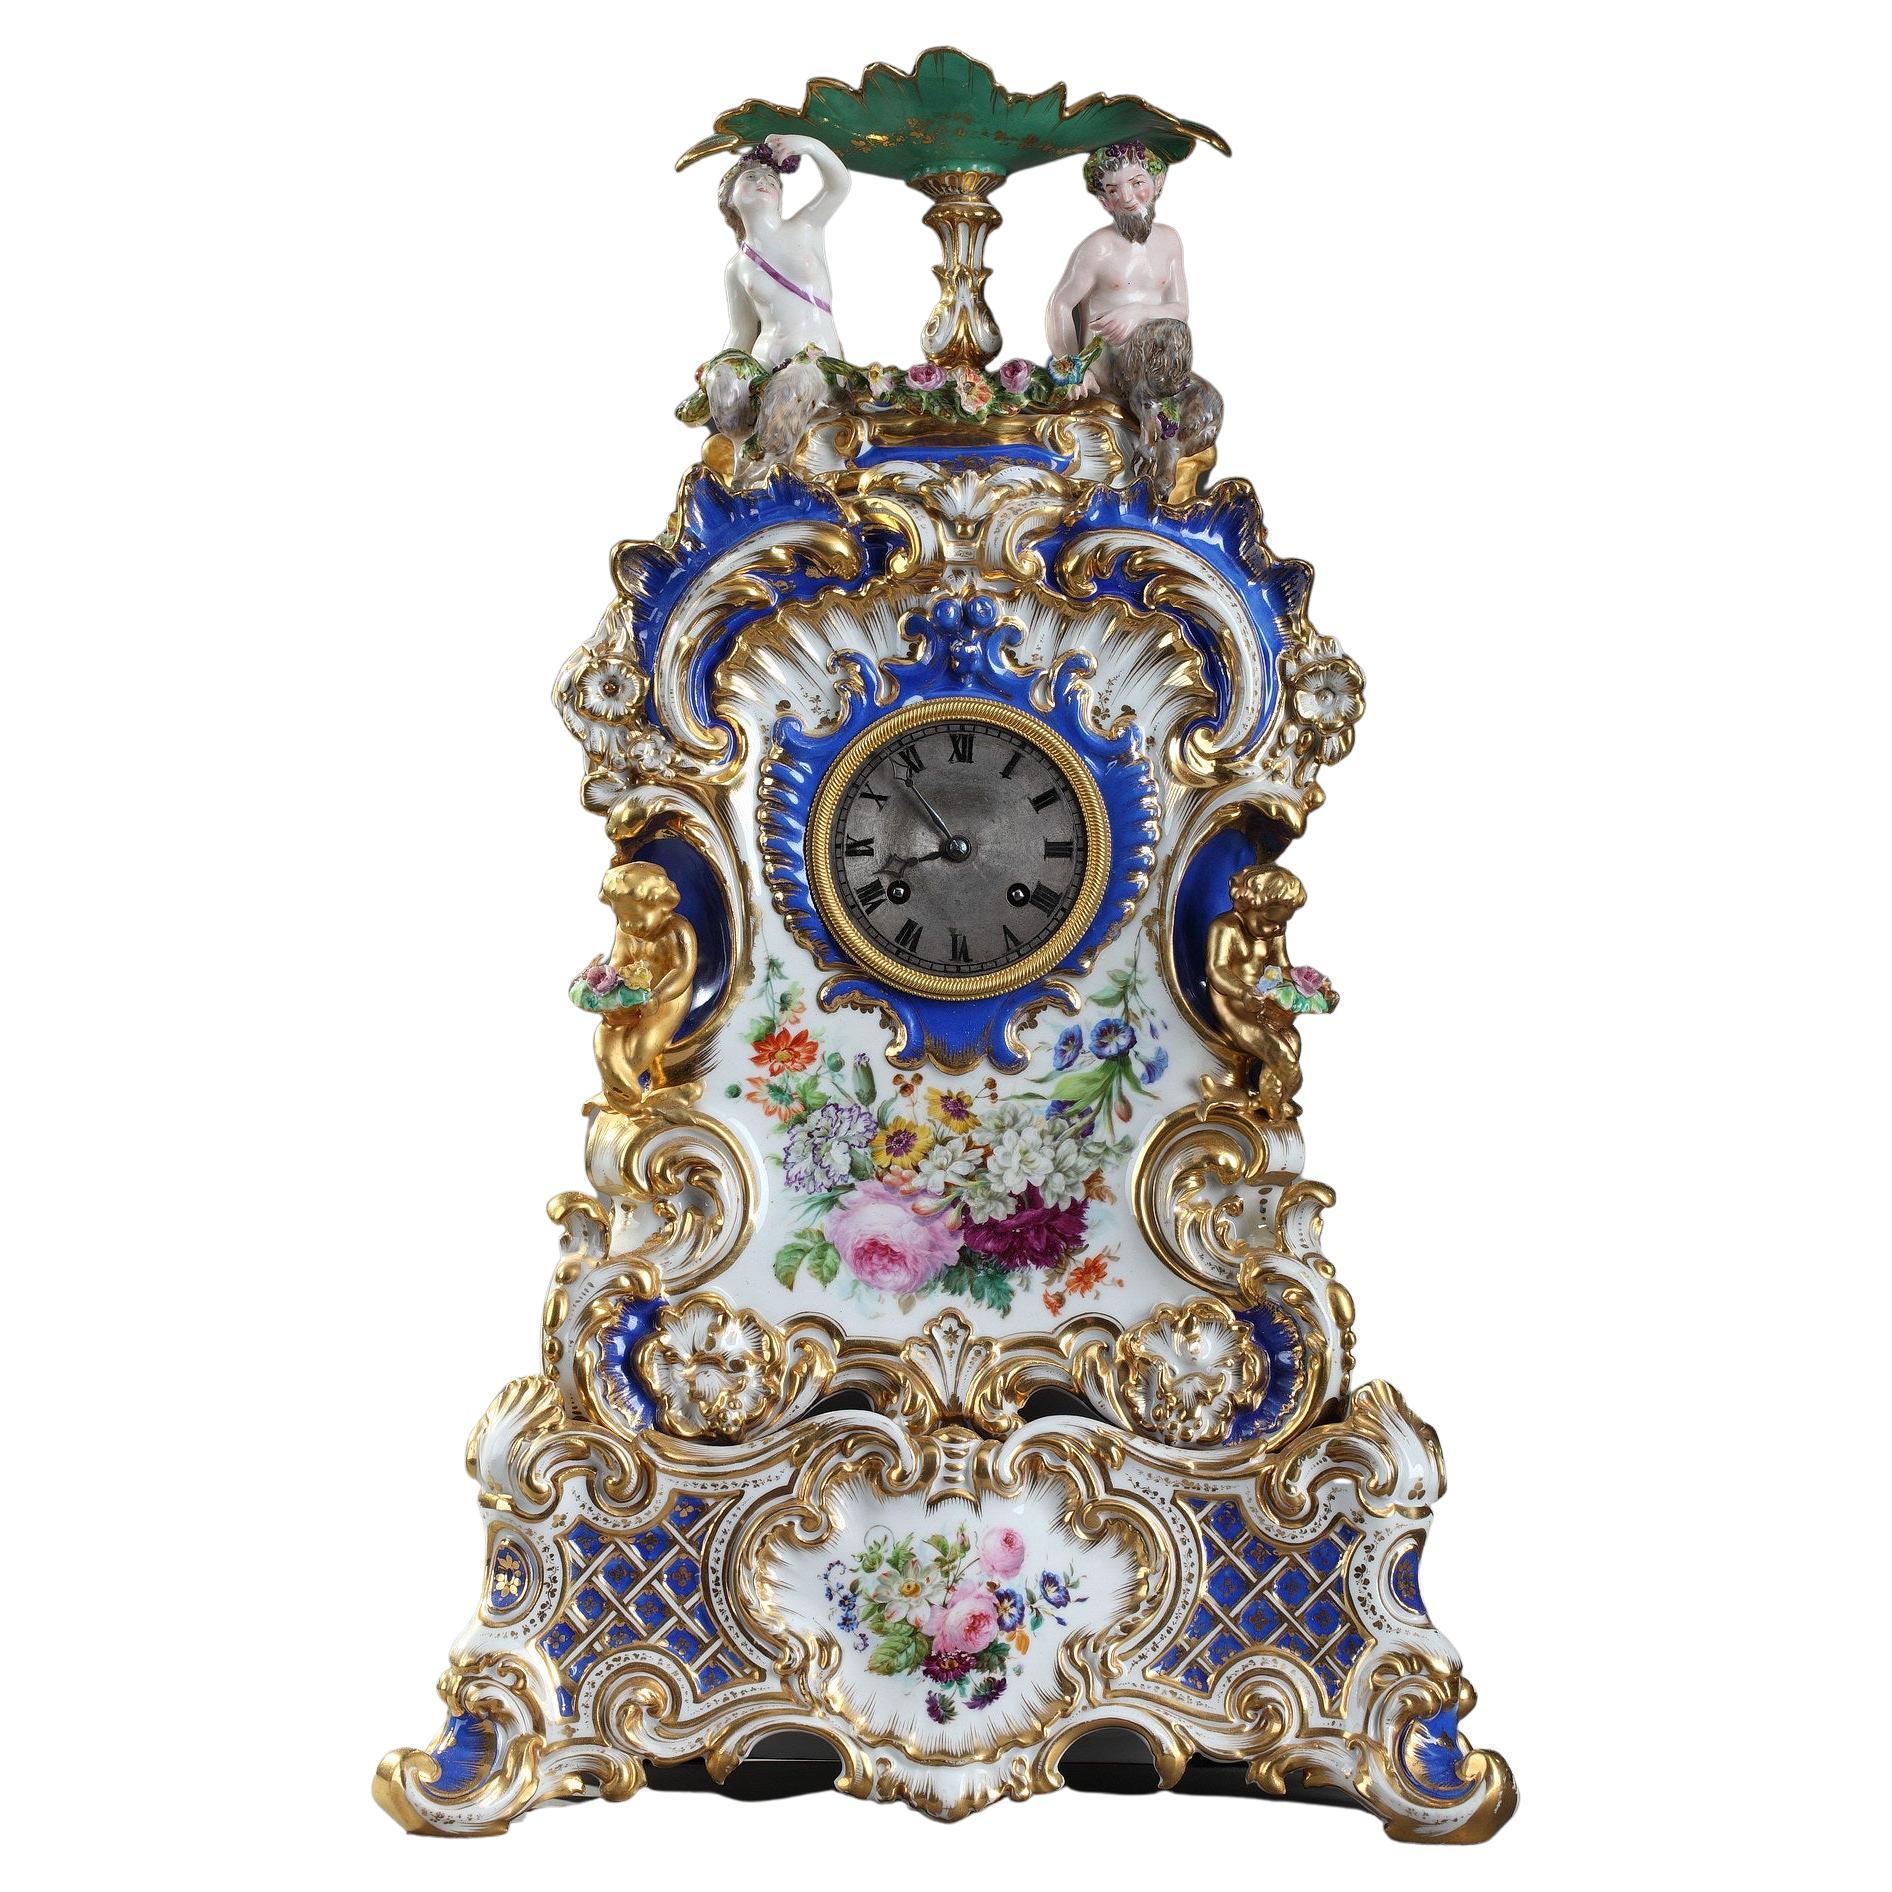 Rocaille Clock in Porcelain in the Taste of Jacob Petit 19th Century